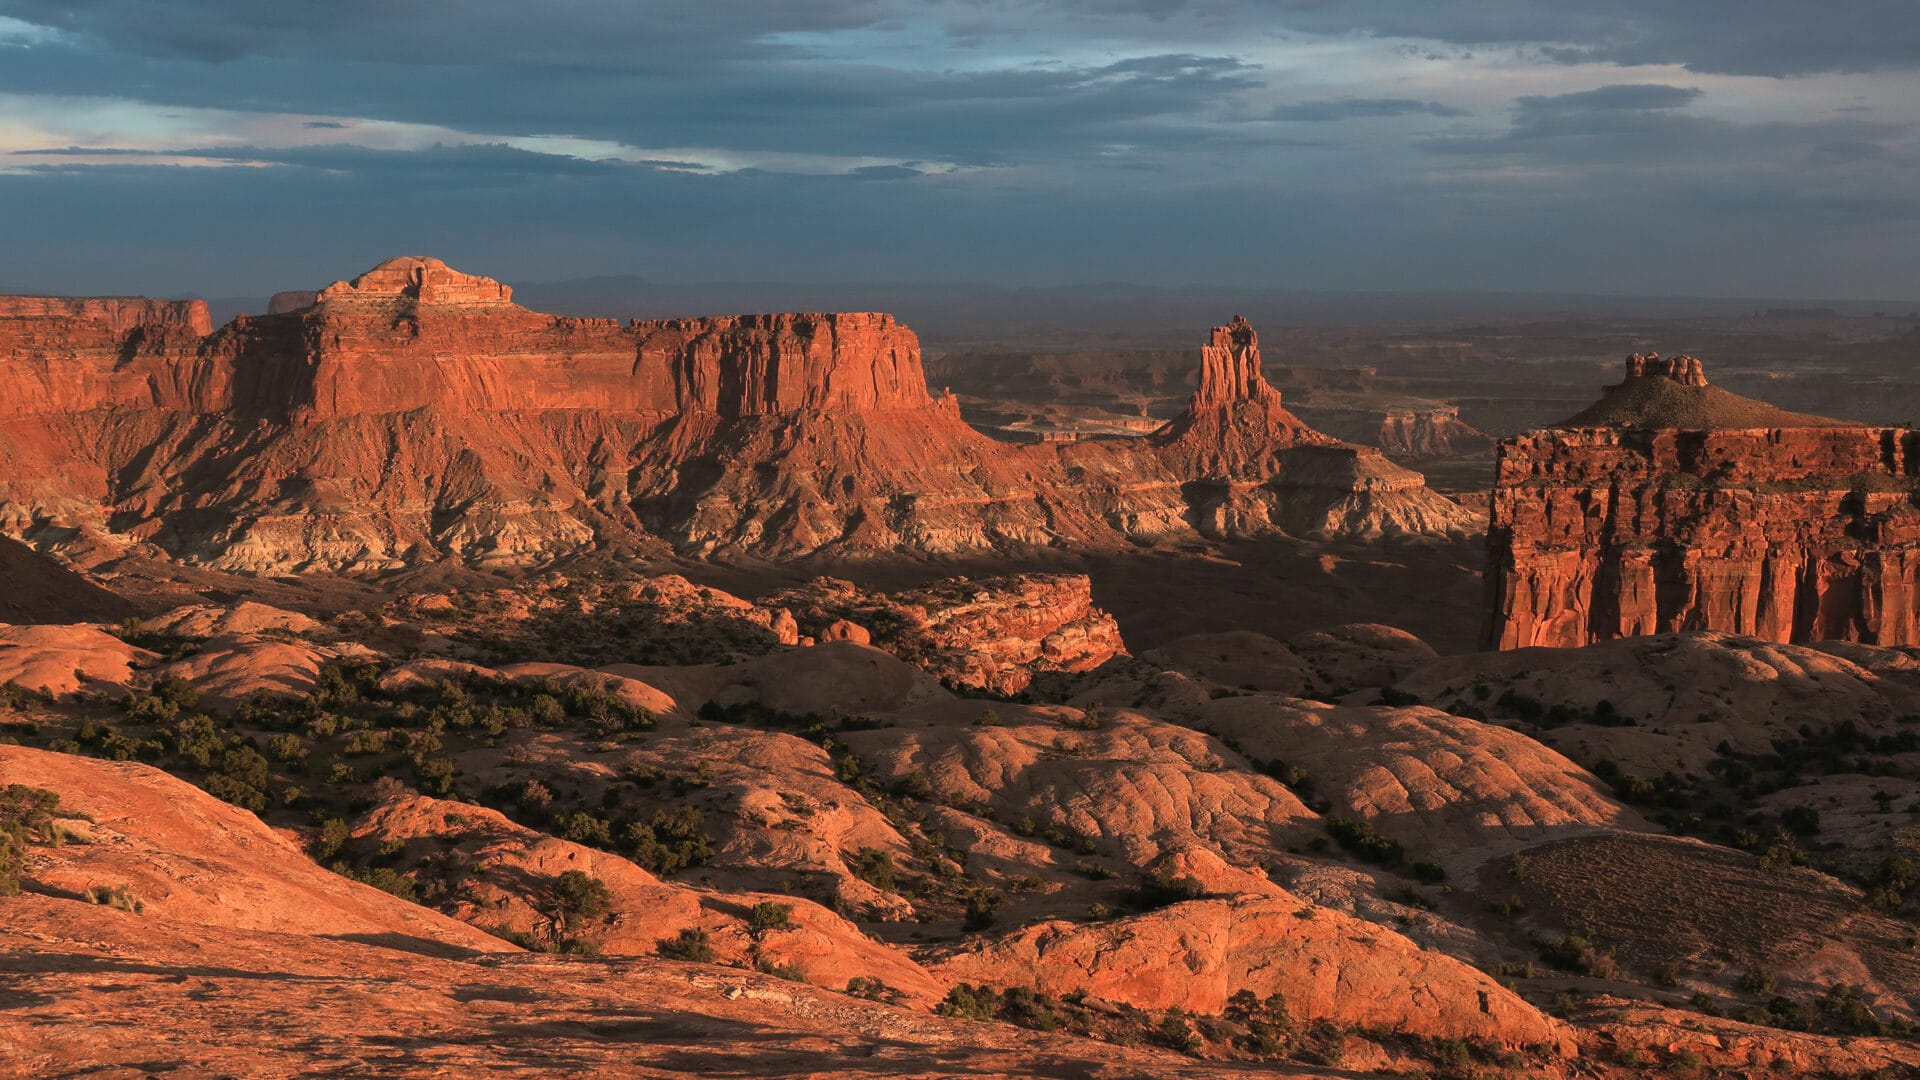 Planning a trip to Canyonlands National Park